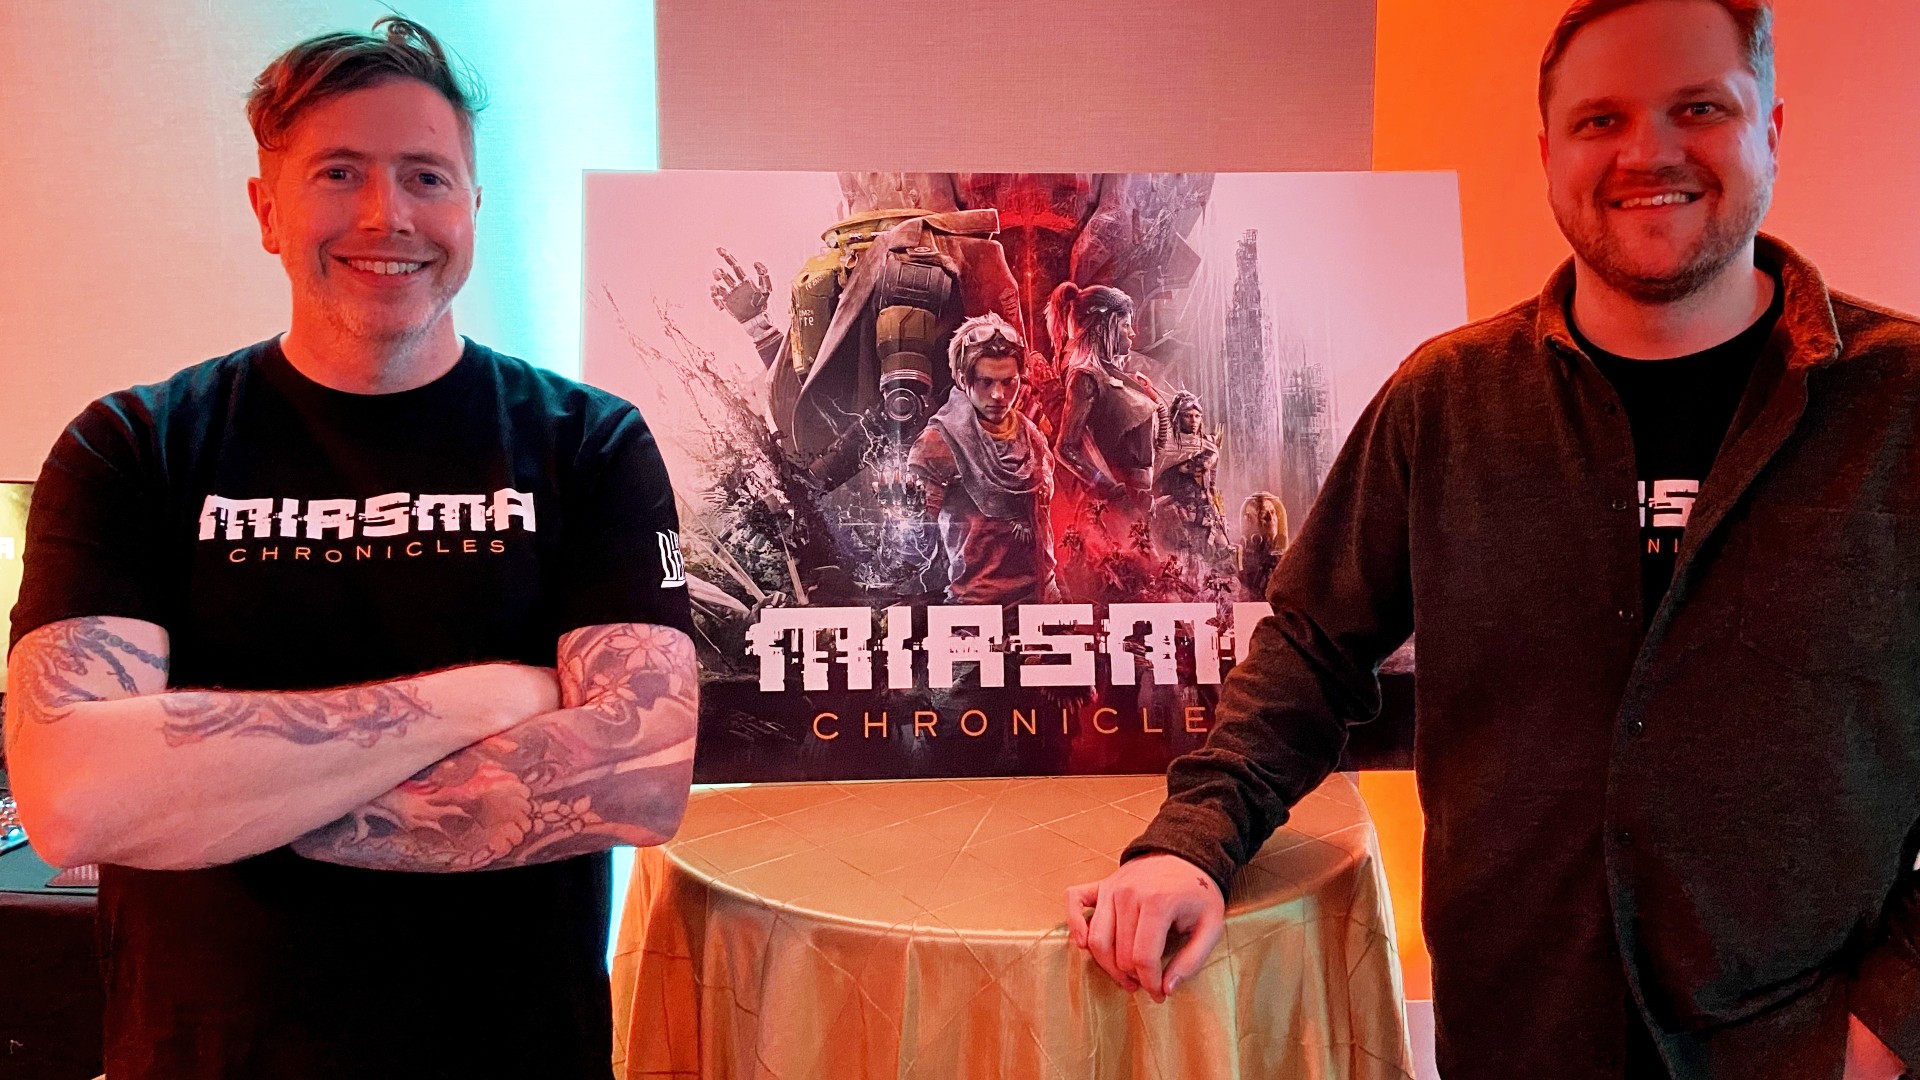 Miasma Chronicles combines XCOM with a new approach to tactical RPGs: two developers from RPG game maker Miasma Chronicles, at GDC 2023